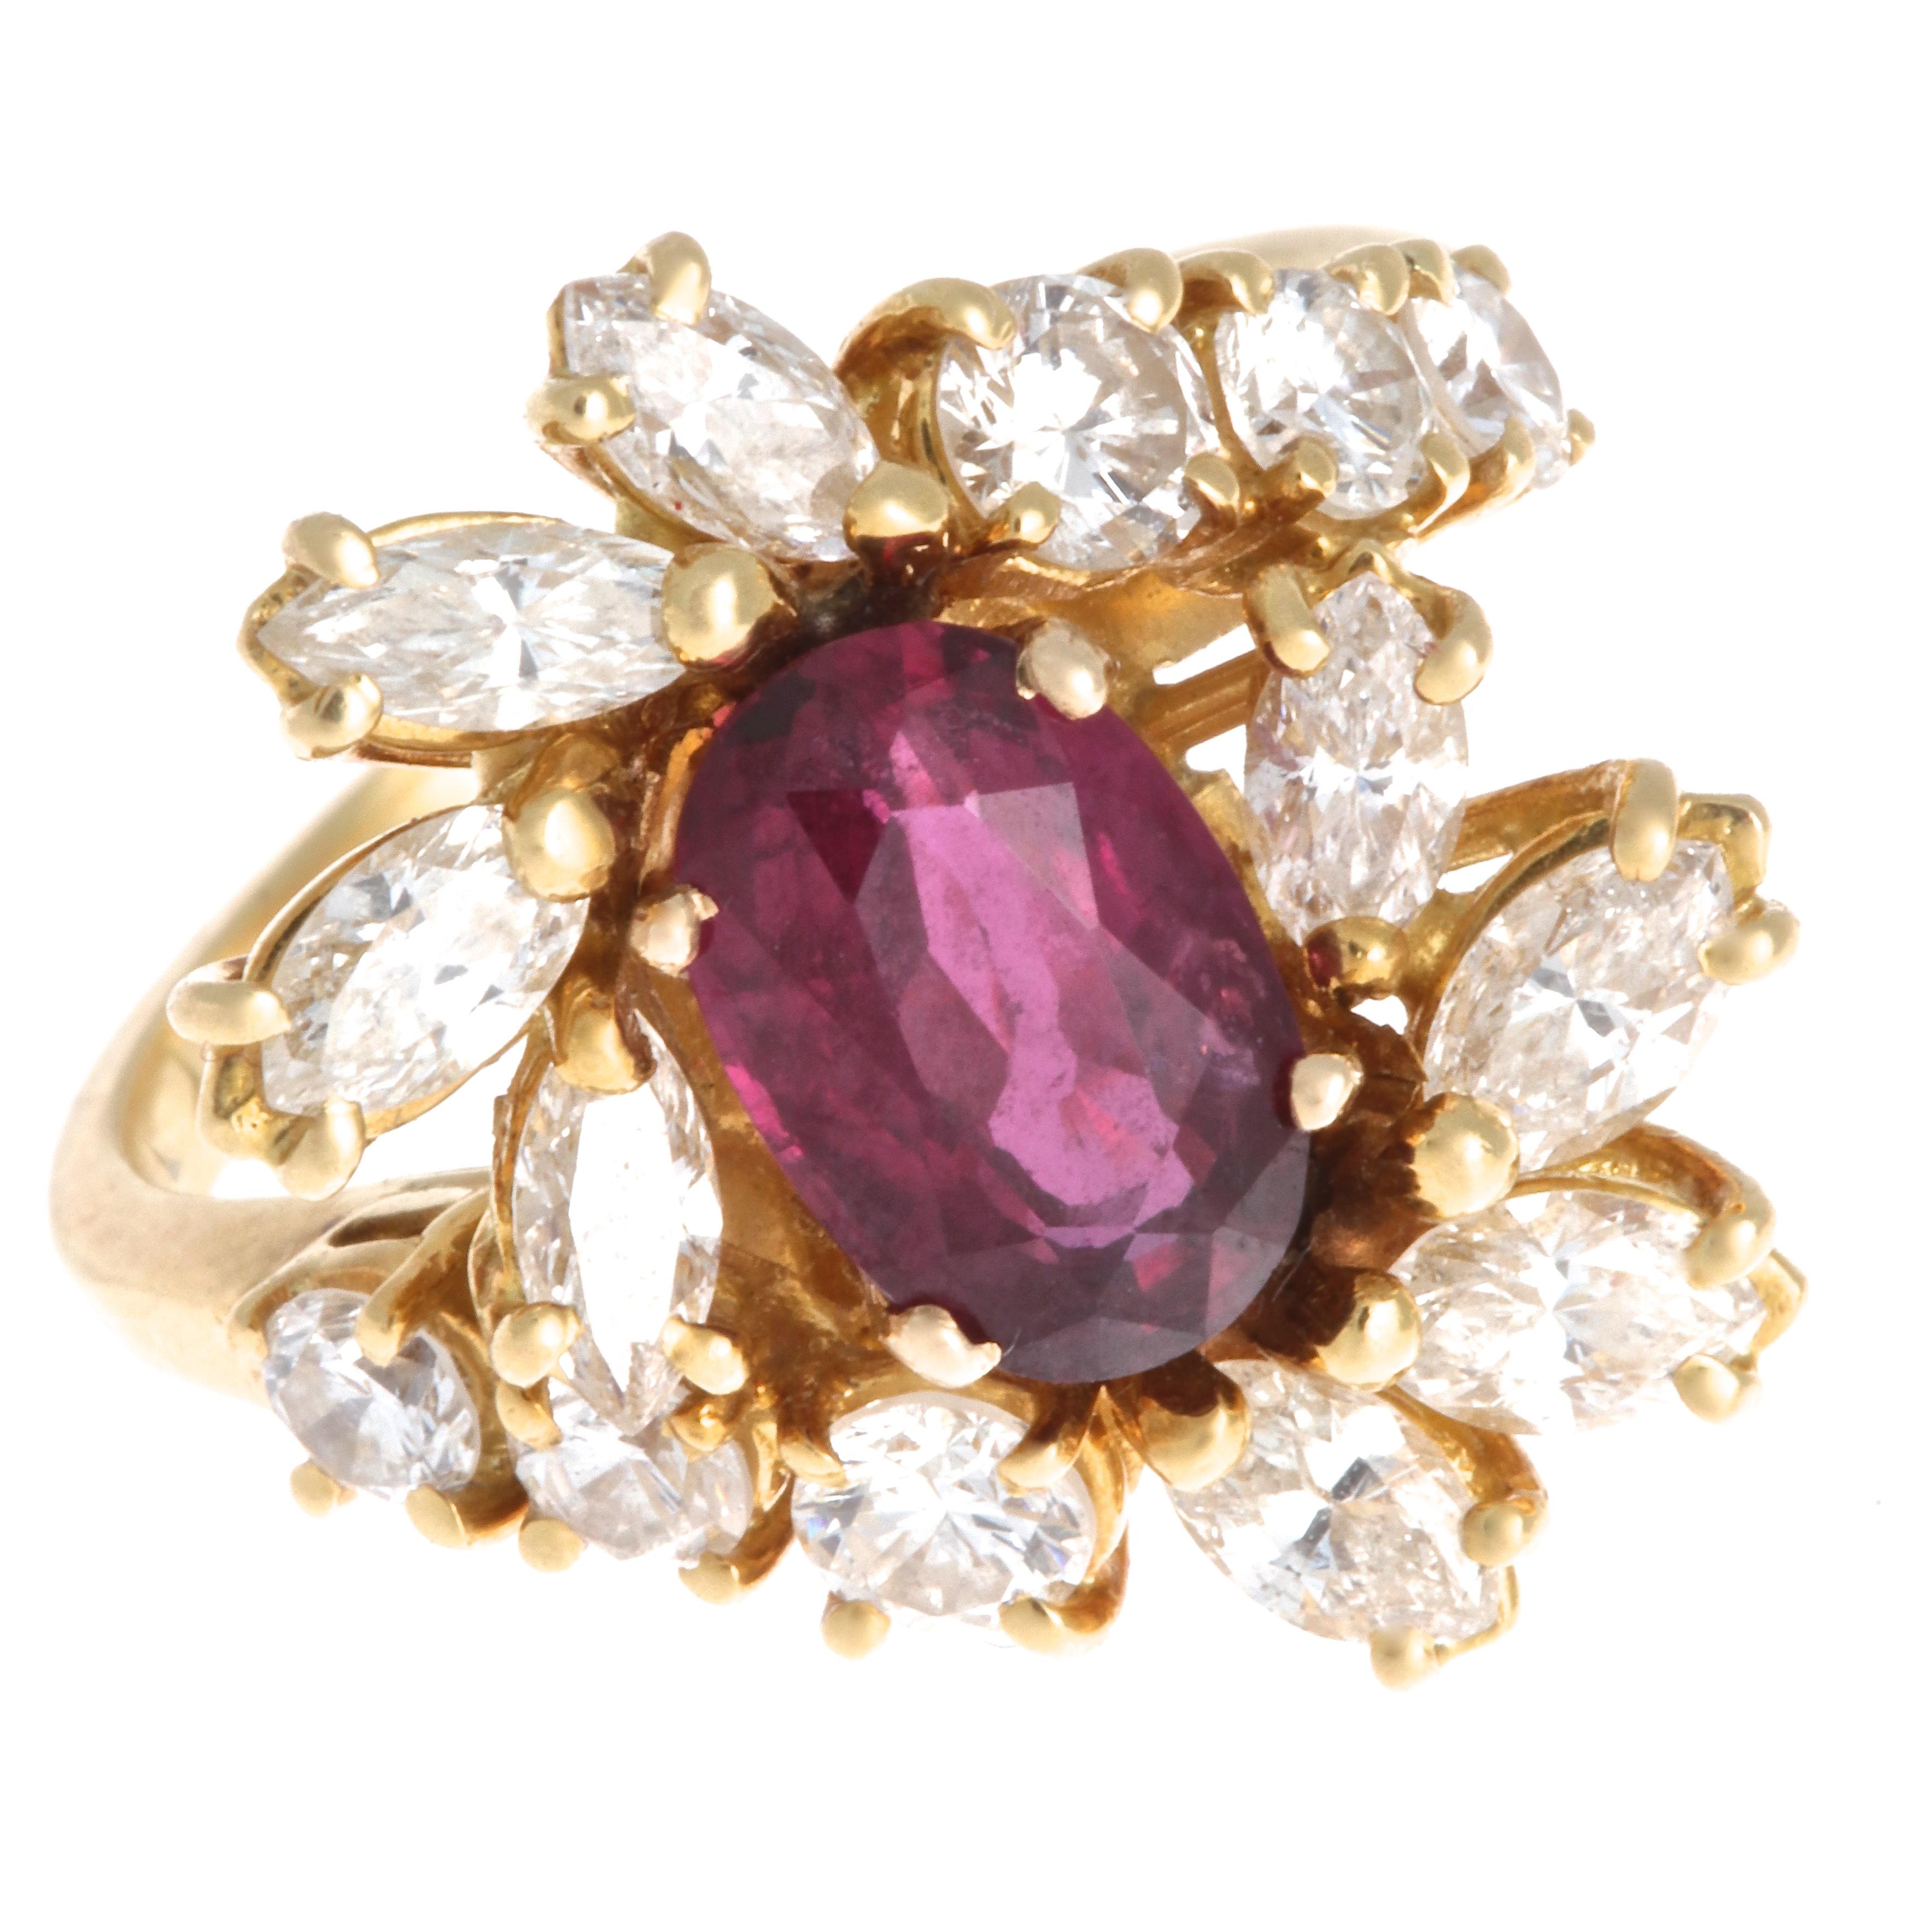 Rubies have been known as a symbol of power, wealth, royalty, and protection. Even in The Wizard of Oz, Dorothy's ruby slippers were thought to protect her from evil. This gorgeous vintage ruby  cluster ring can become your own talisman. The oval